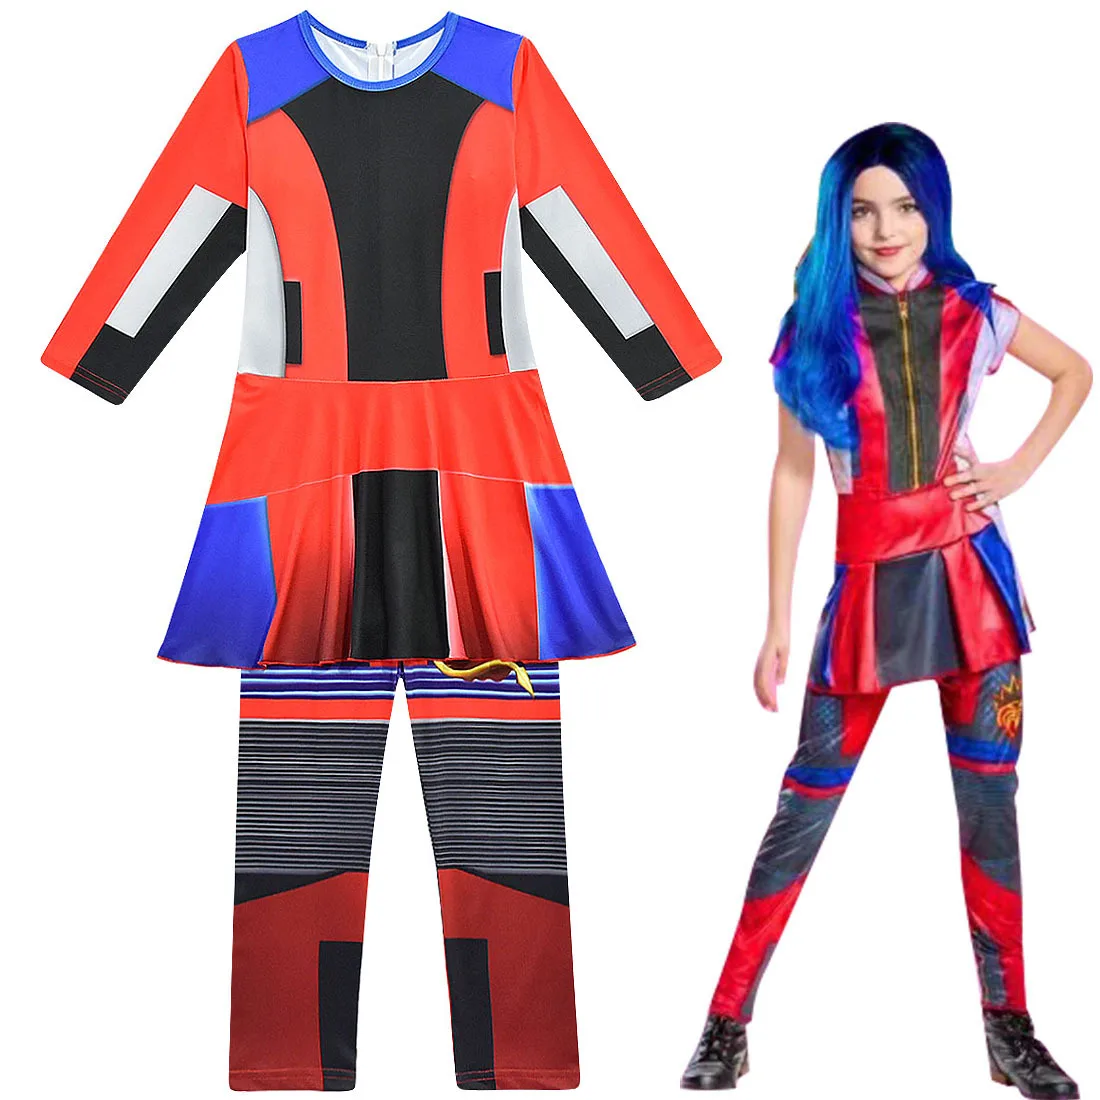 Halloween Costumes for Girls Vocaloid Cosplay Descendants 3 Evie Mal Audrey Kids Jumpsuits Zentai Funny Carnival Party Clothes